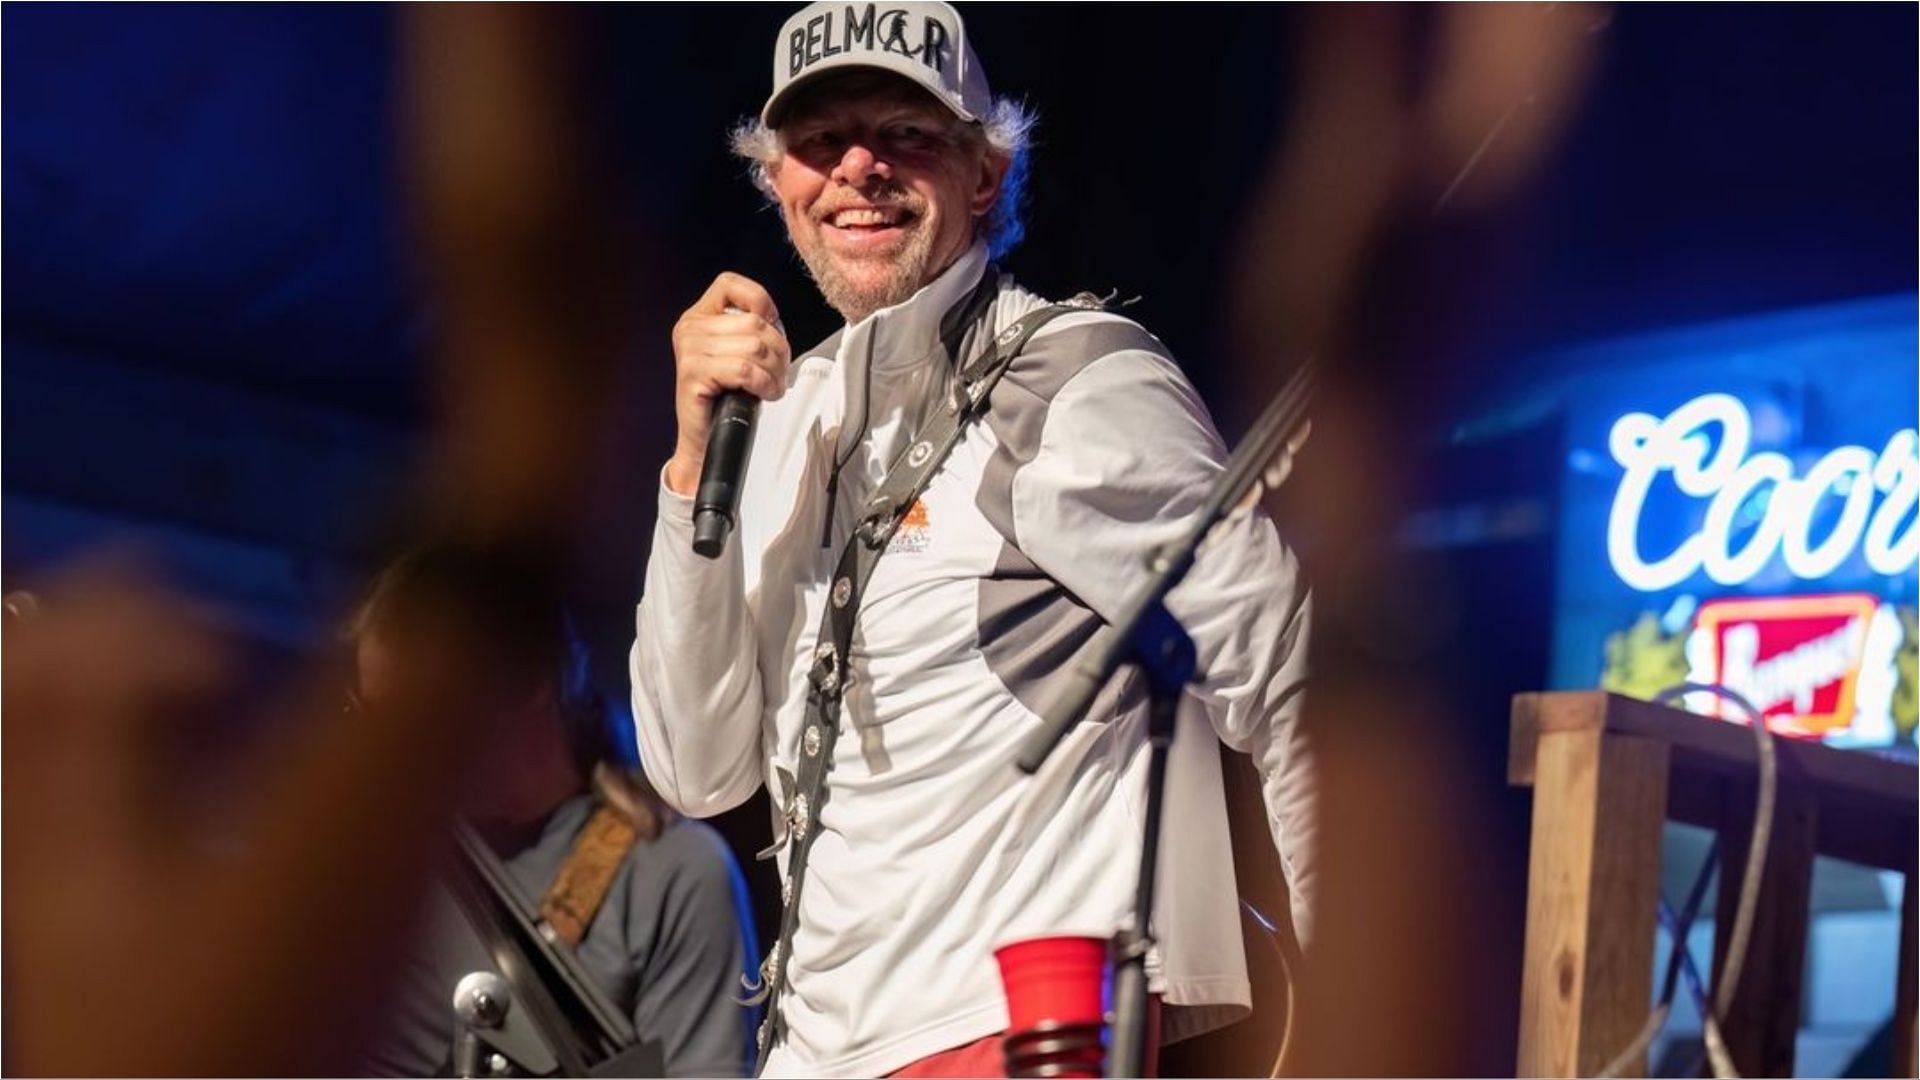 Toby Keith gave an update on his stomach cancer during his appearance at an awards ceremony (Image via tobykeith/Instagram)